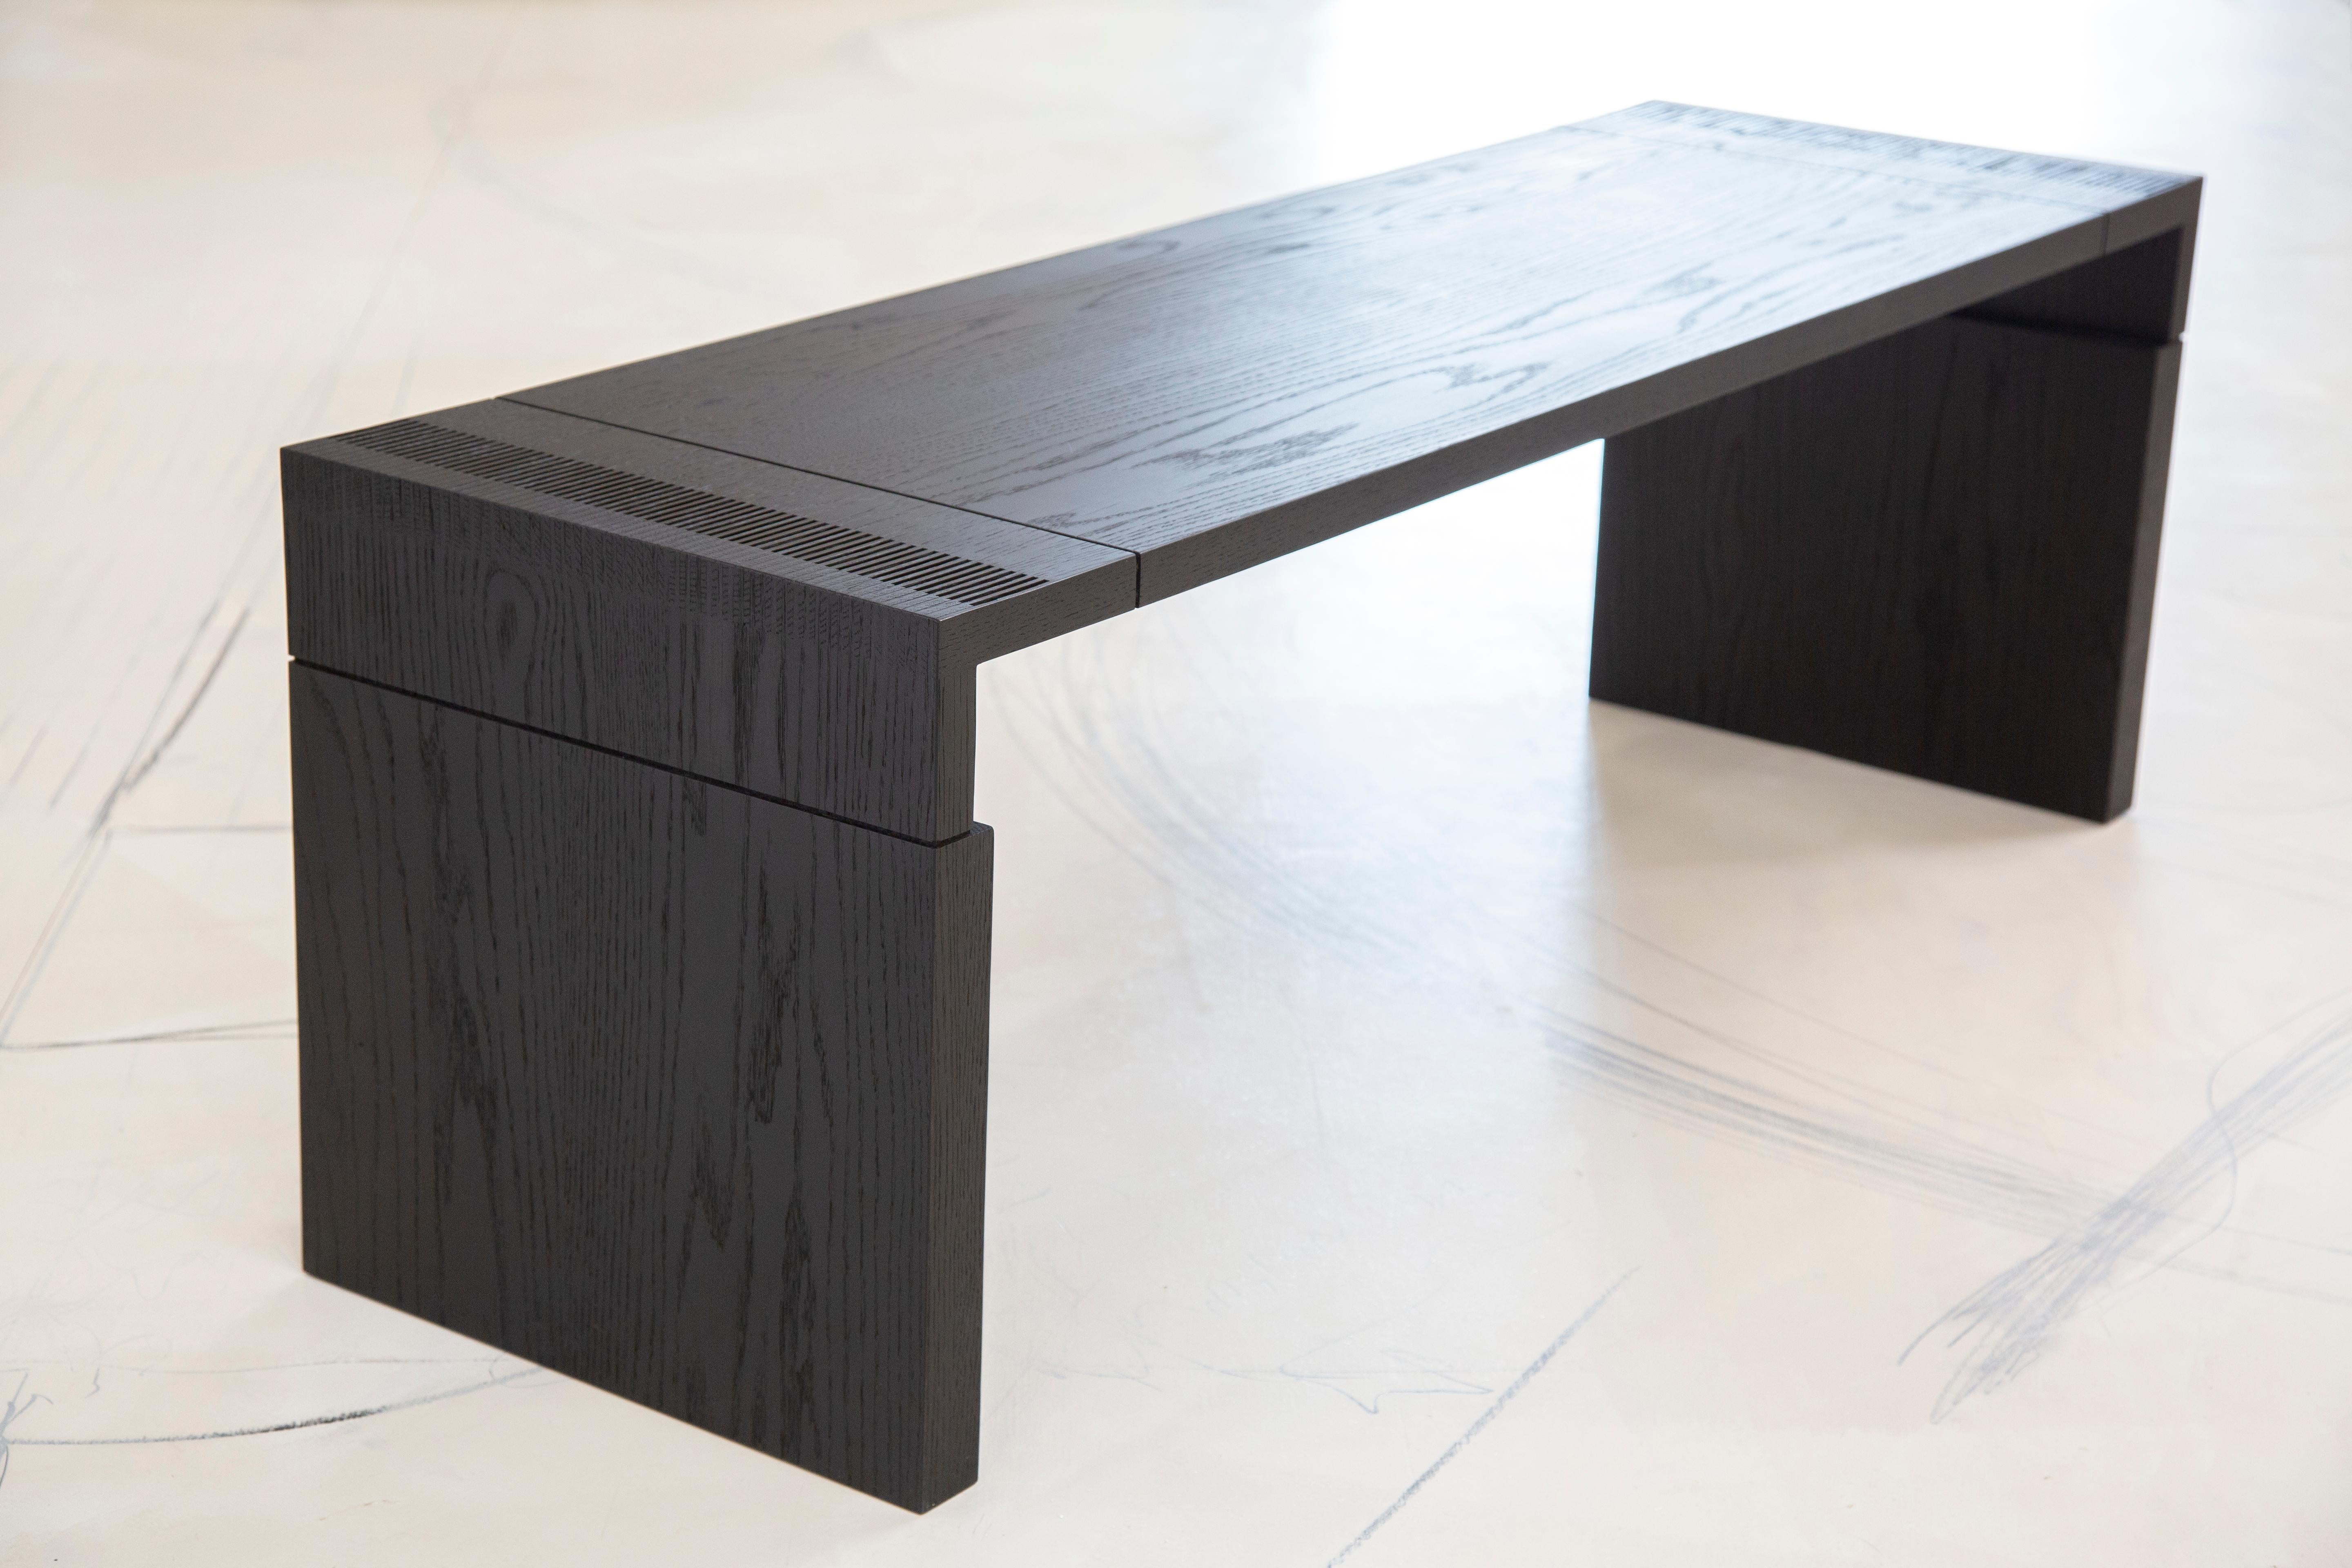 Made to order in Brooklyn, New York this customizable bench is handmade of solid wood with meticulously cut finger joints and subtle architecturally inspired details. 
Shown: 53